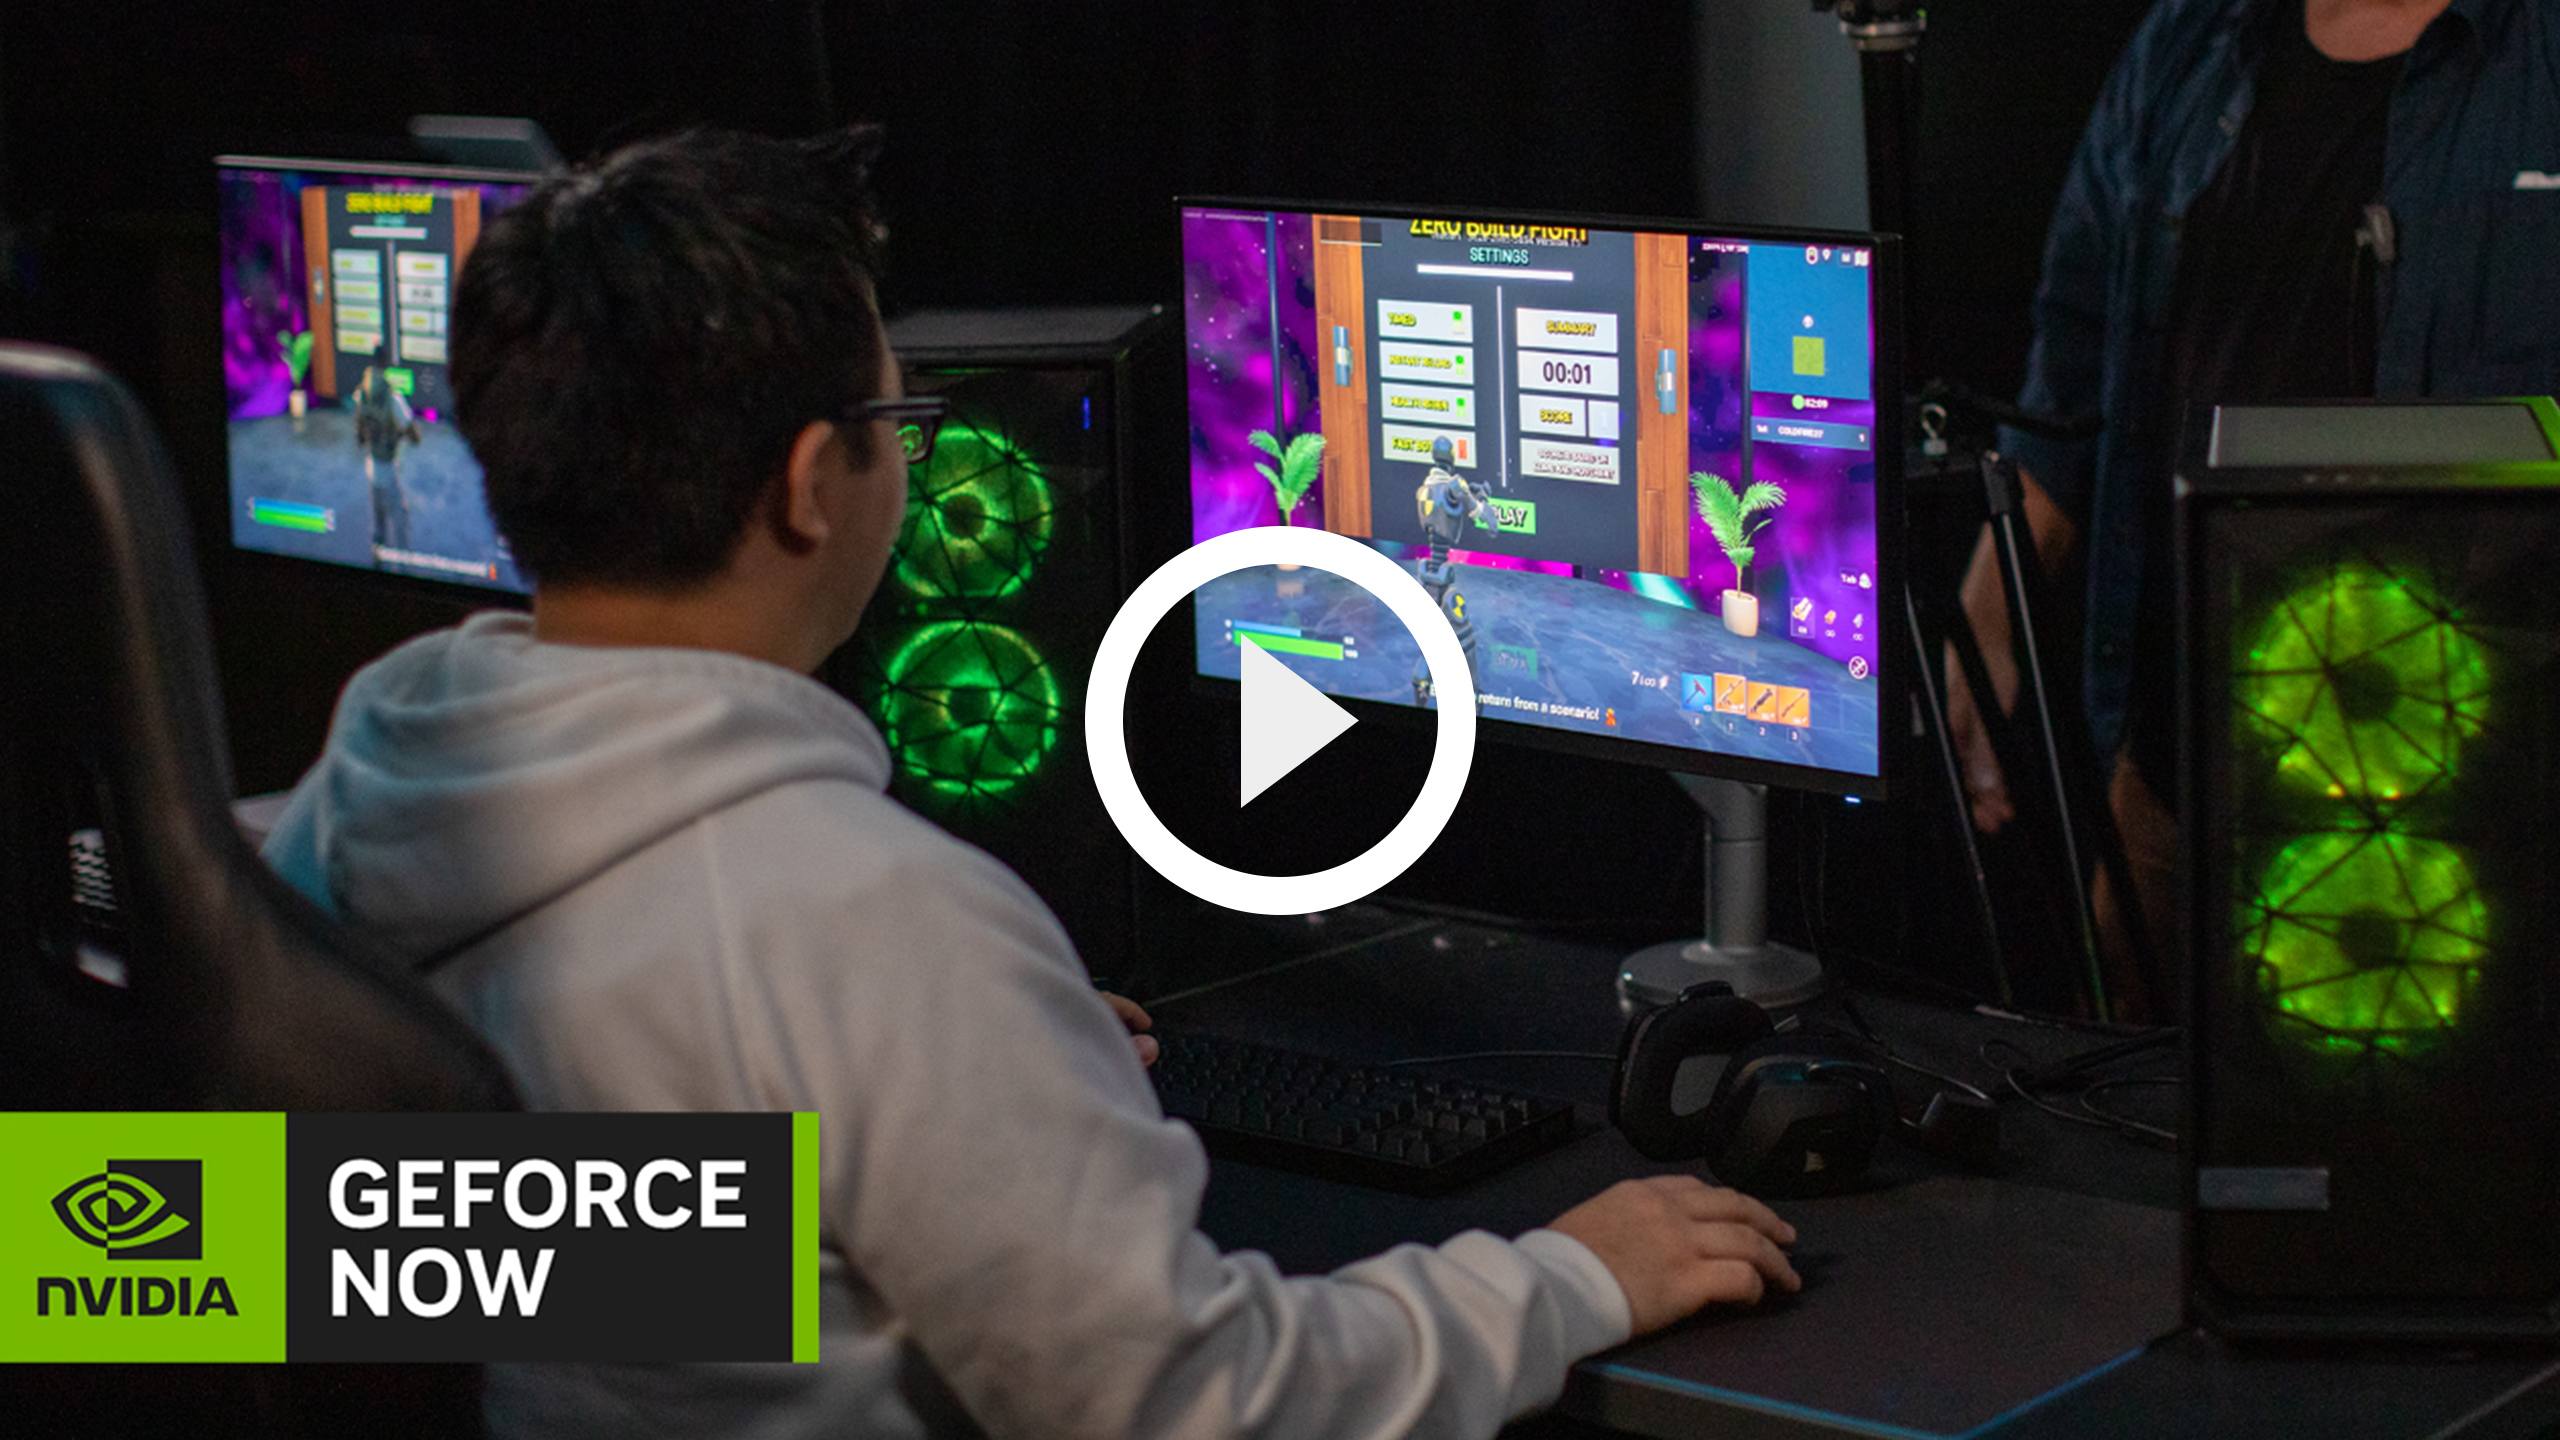 KovaaK's Full Launch comes to GeForce NOW Powered by Pentanet